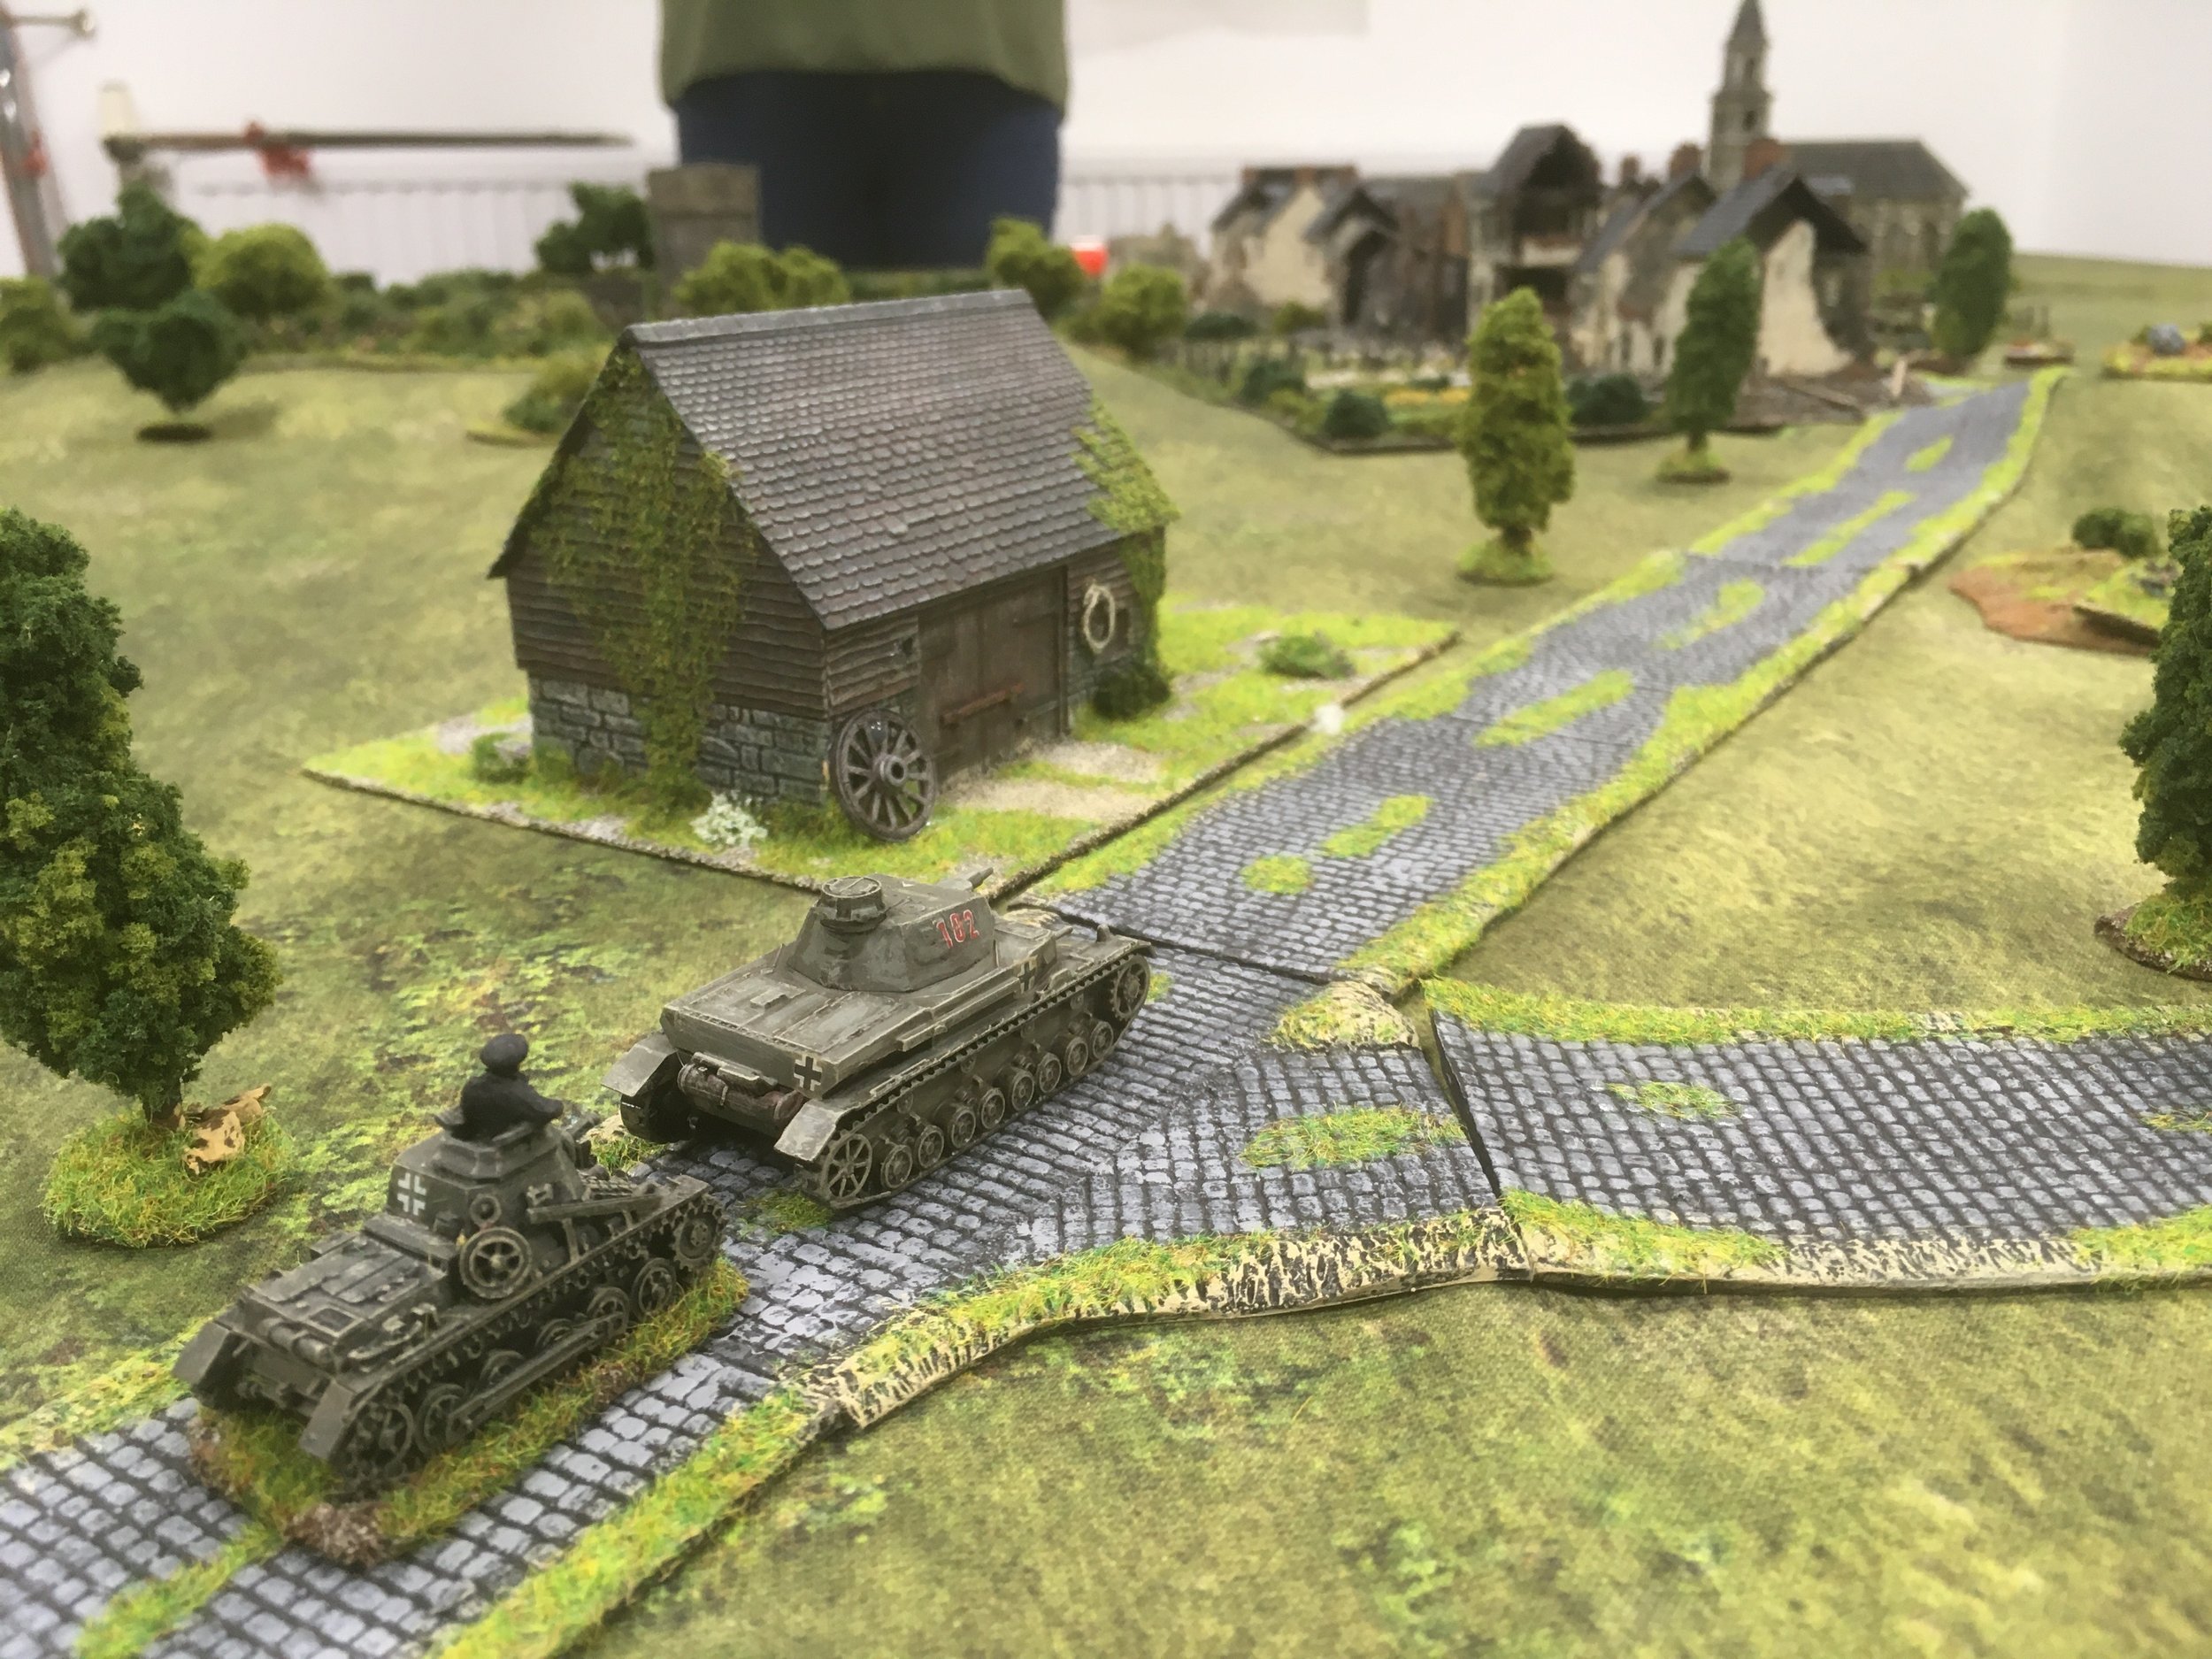 The Panzer IV moves swiftly down the road in an attempt to relieve the motorcycle troops.